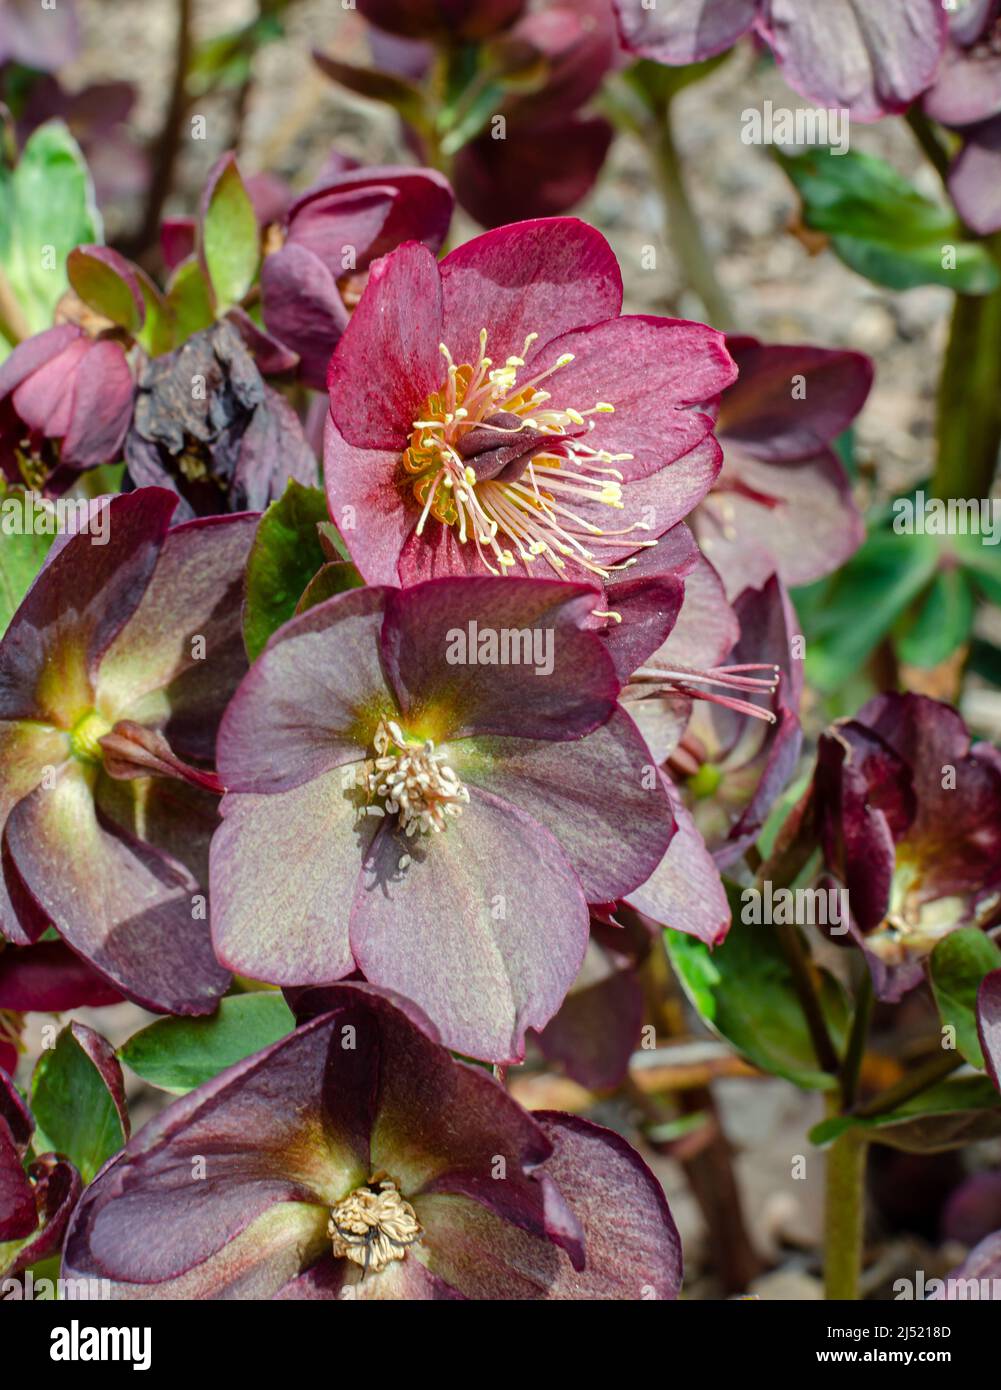 Helleborus HGC Ice 'n' Roses Red, Jozef Heuger, Germany Stock Photo